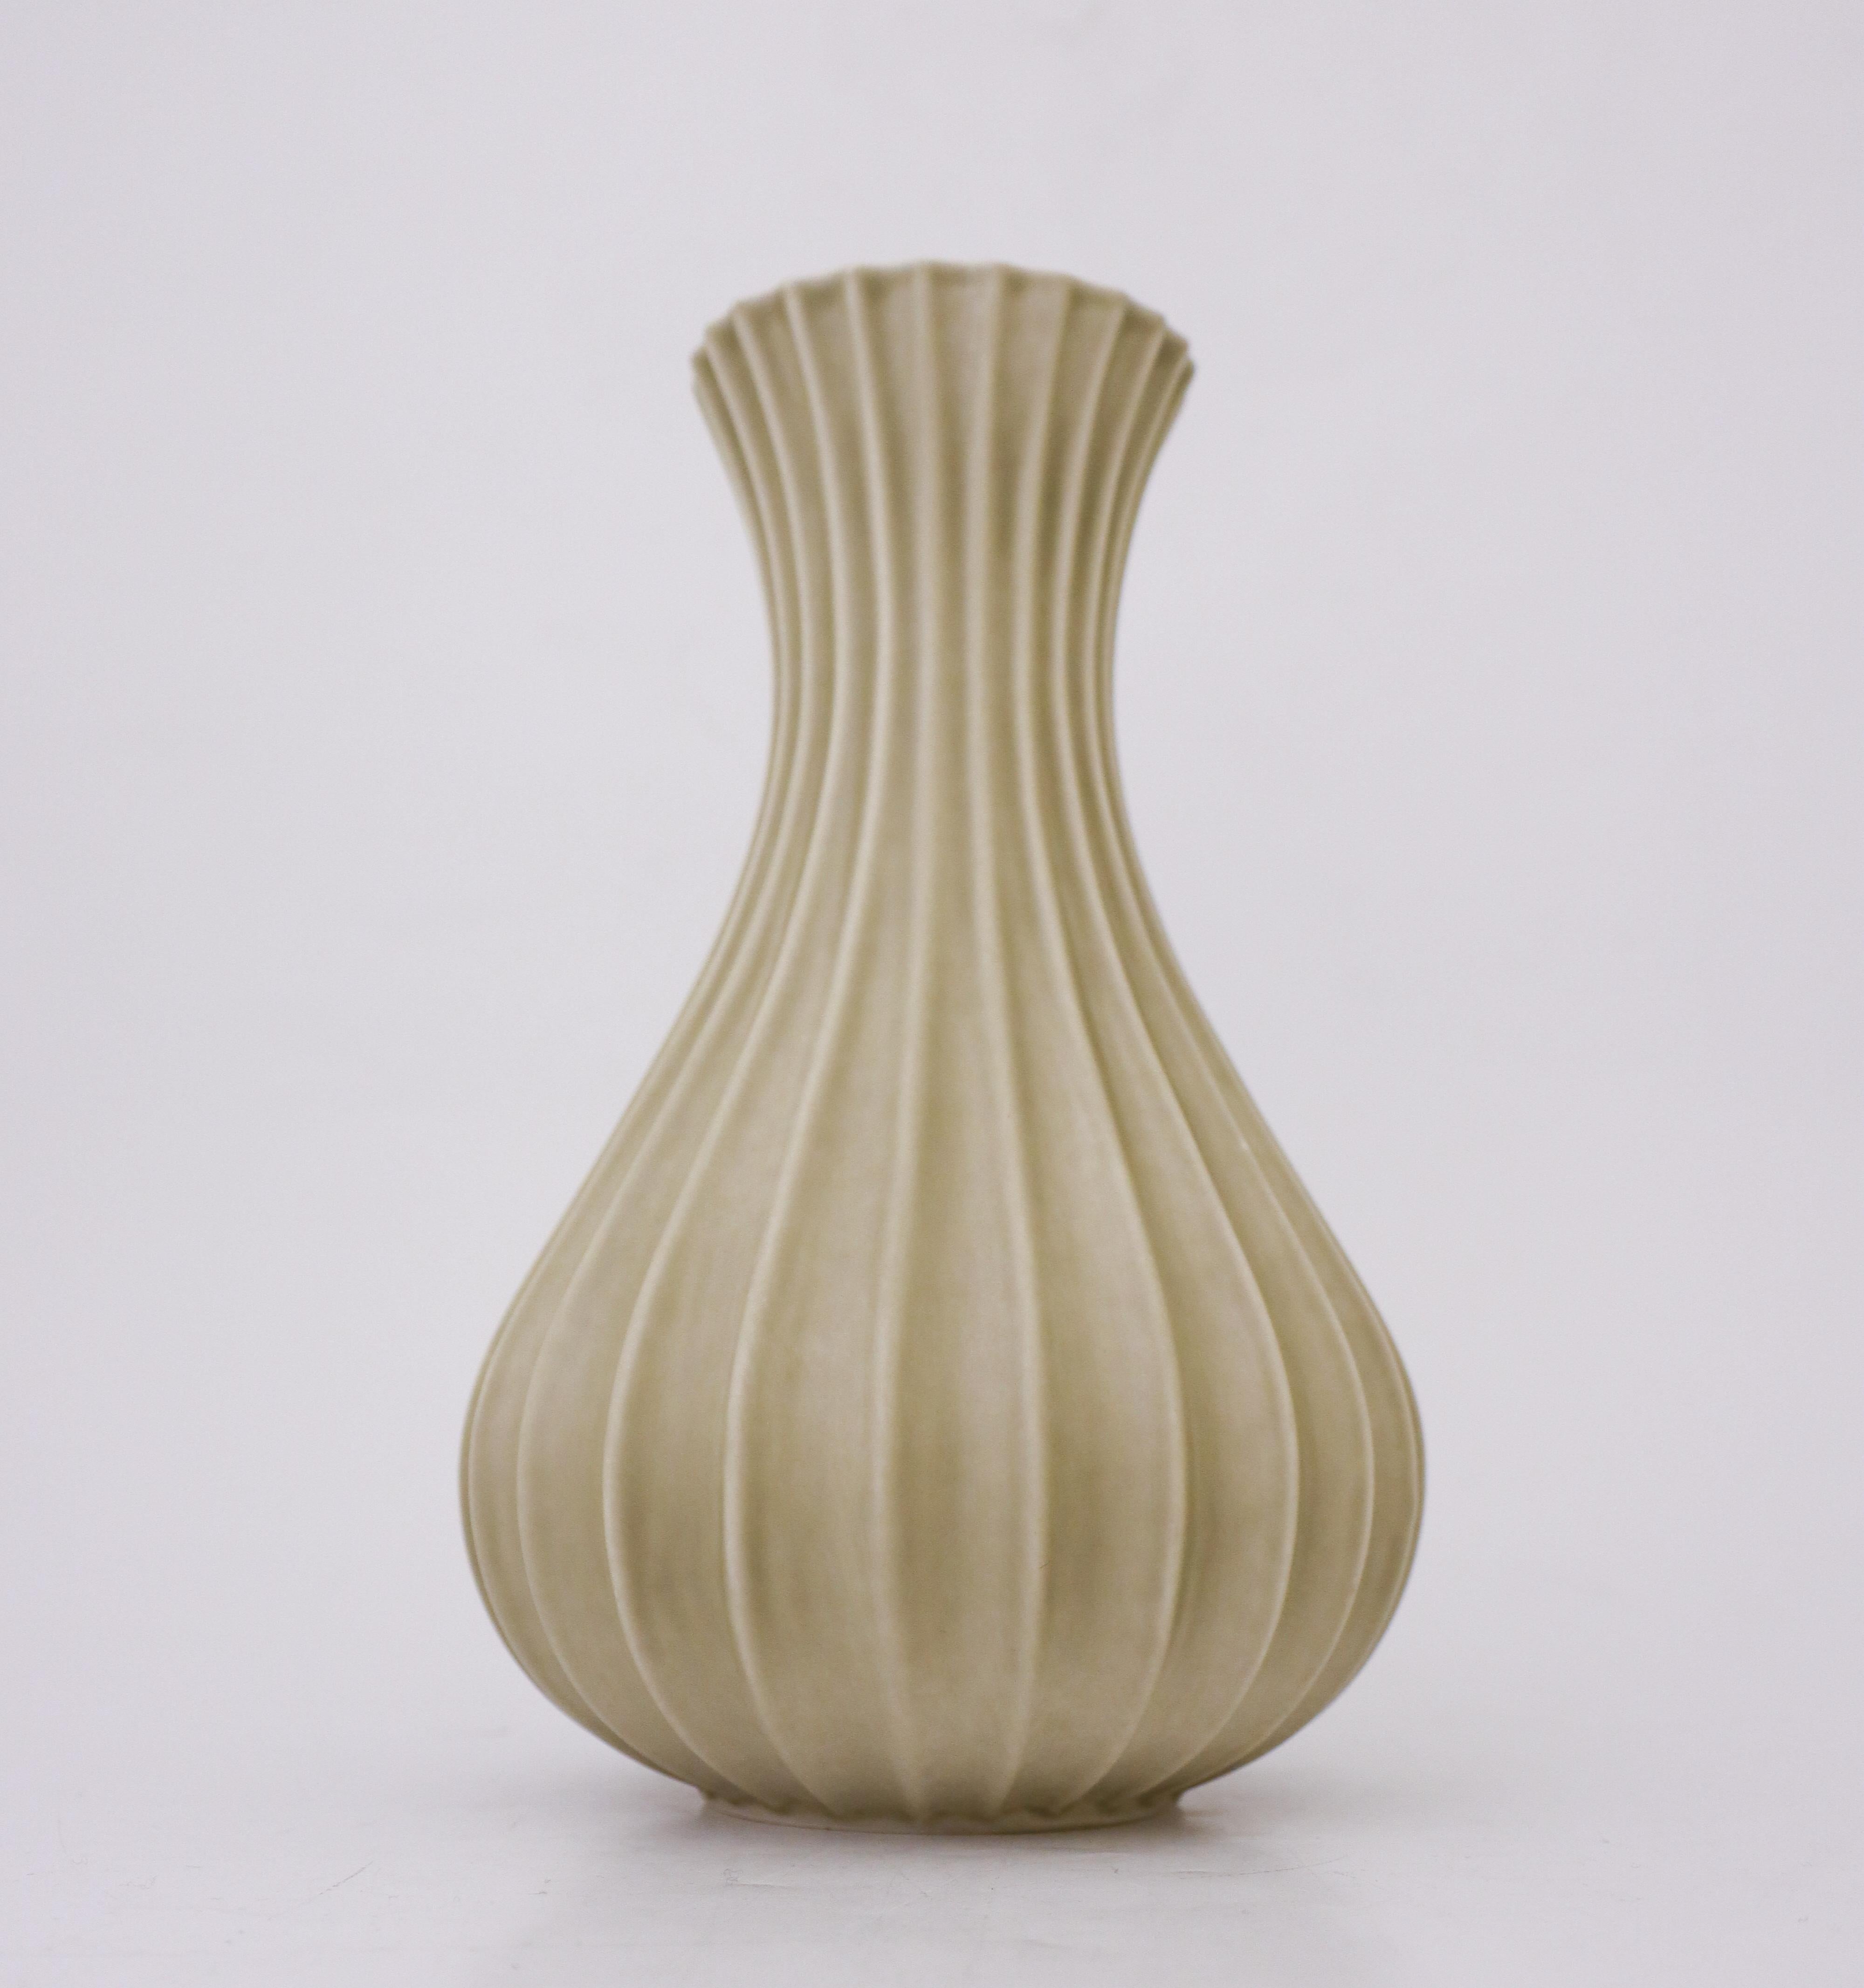 A lovely olive-green / grey vase designed by Pia Rönndahl at Rörstrand in the 1980s. The vase is 23 cm high and in excellent condition except from some minor marks. It is marked as on photo and is 2nd quality. 

